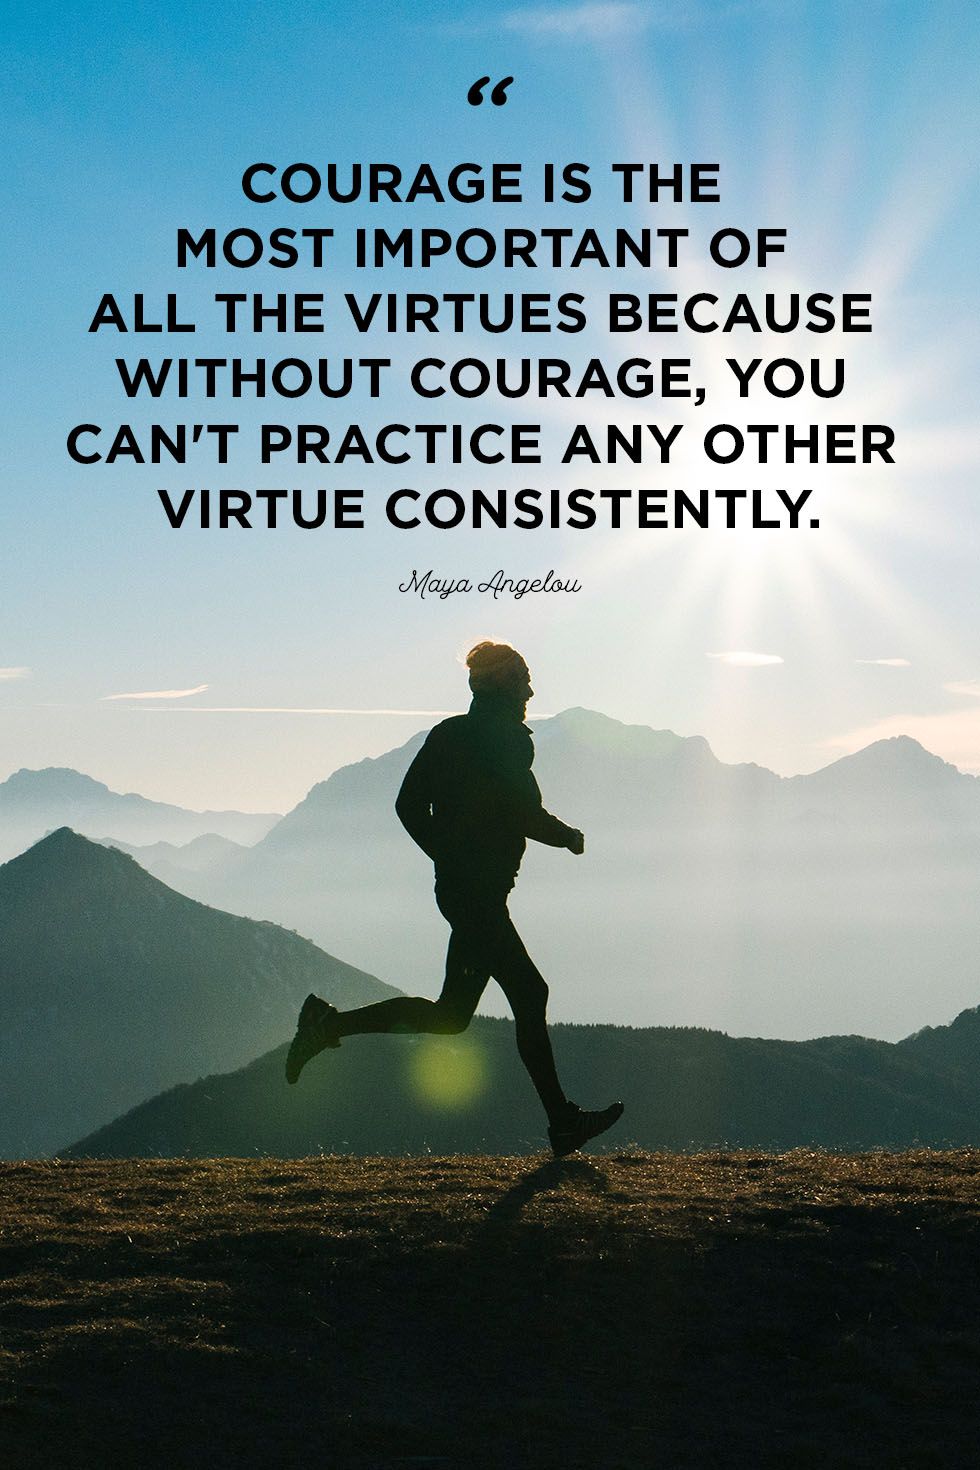 courages is the most important of all the virtues because without courage you can’t practice any other virtue consistently